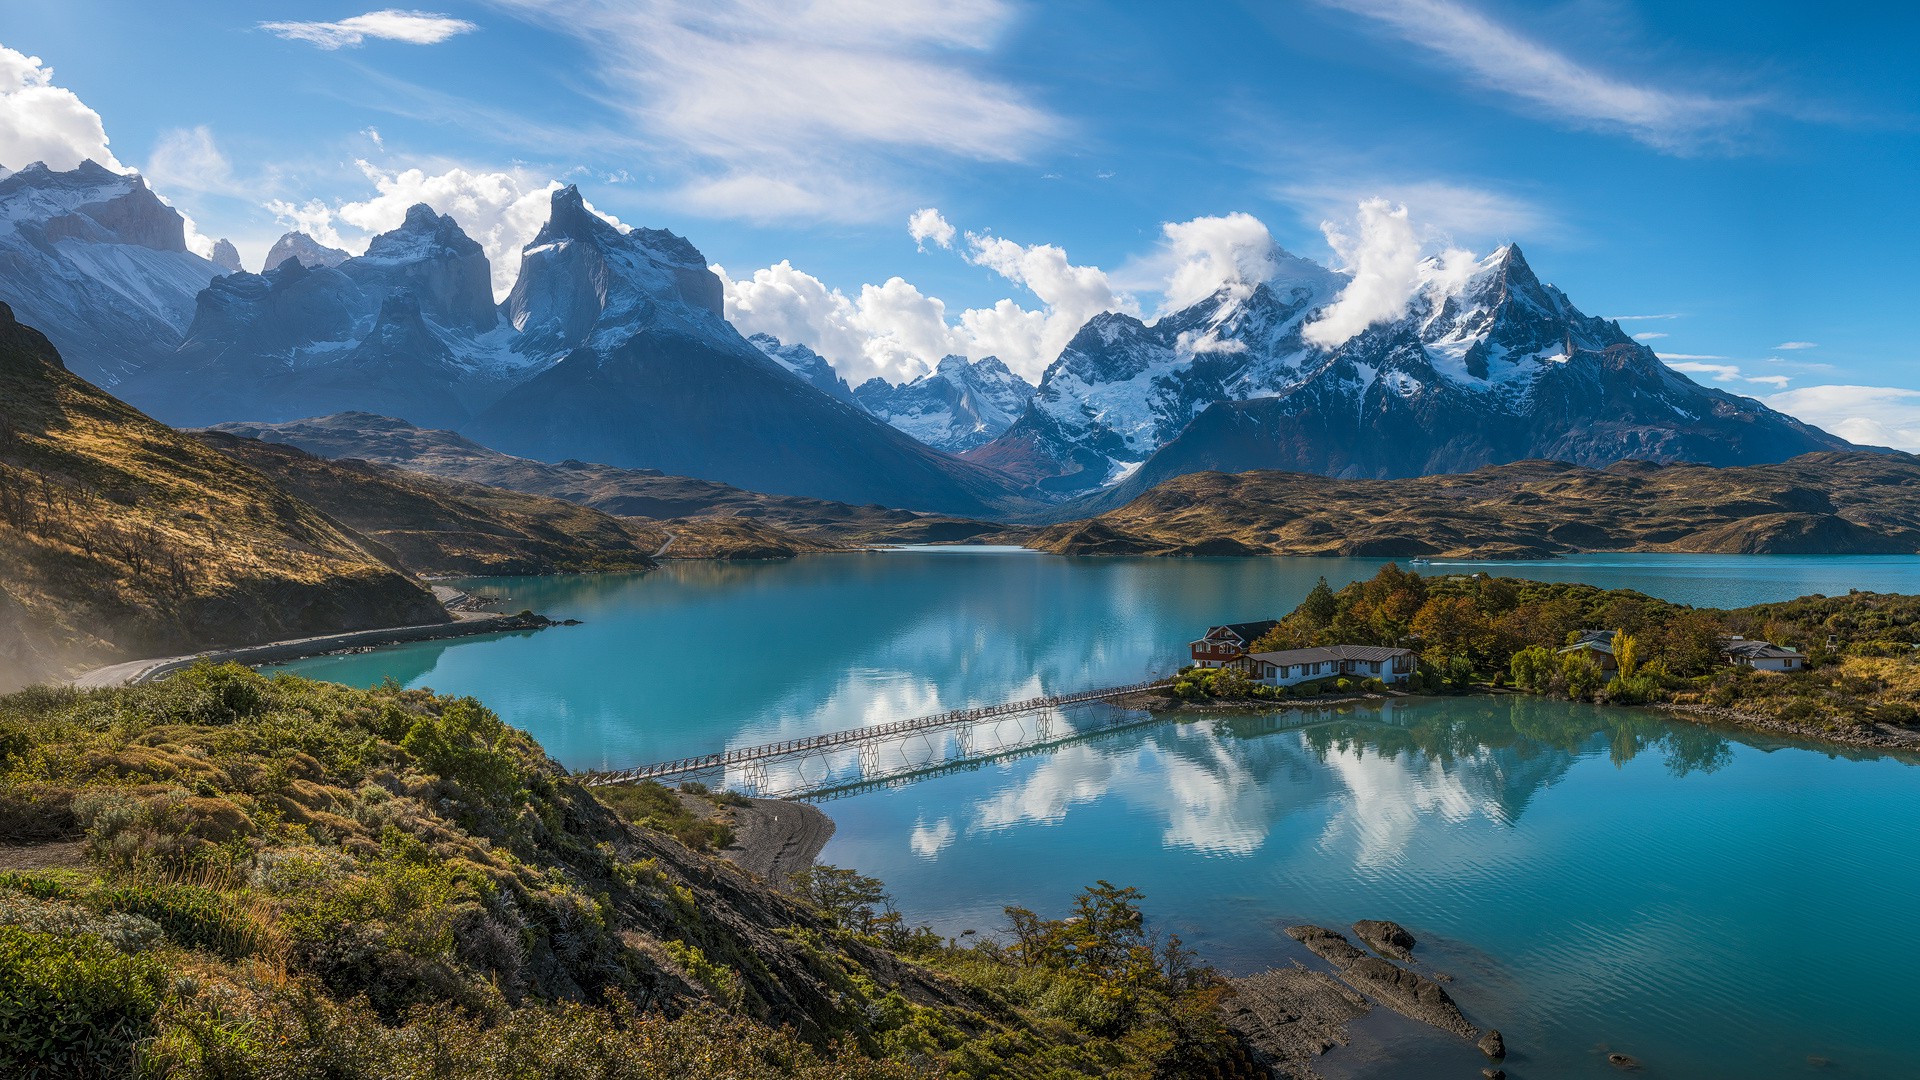 Torres Del Paine, Patagonia, Chile, Mountain, Lake, Shrubs, Road, Snowy Peak, Clouds, Hotels, Bridge, Water, Blue, Turquoise, Nature, Landscape Wallpaper